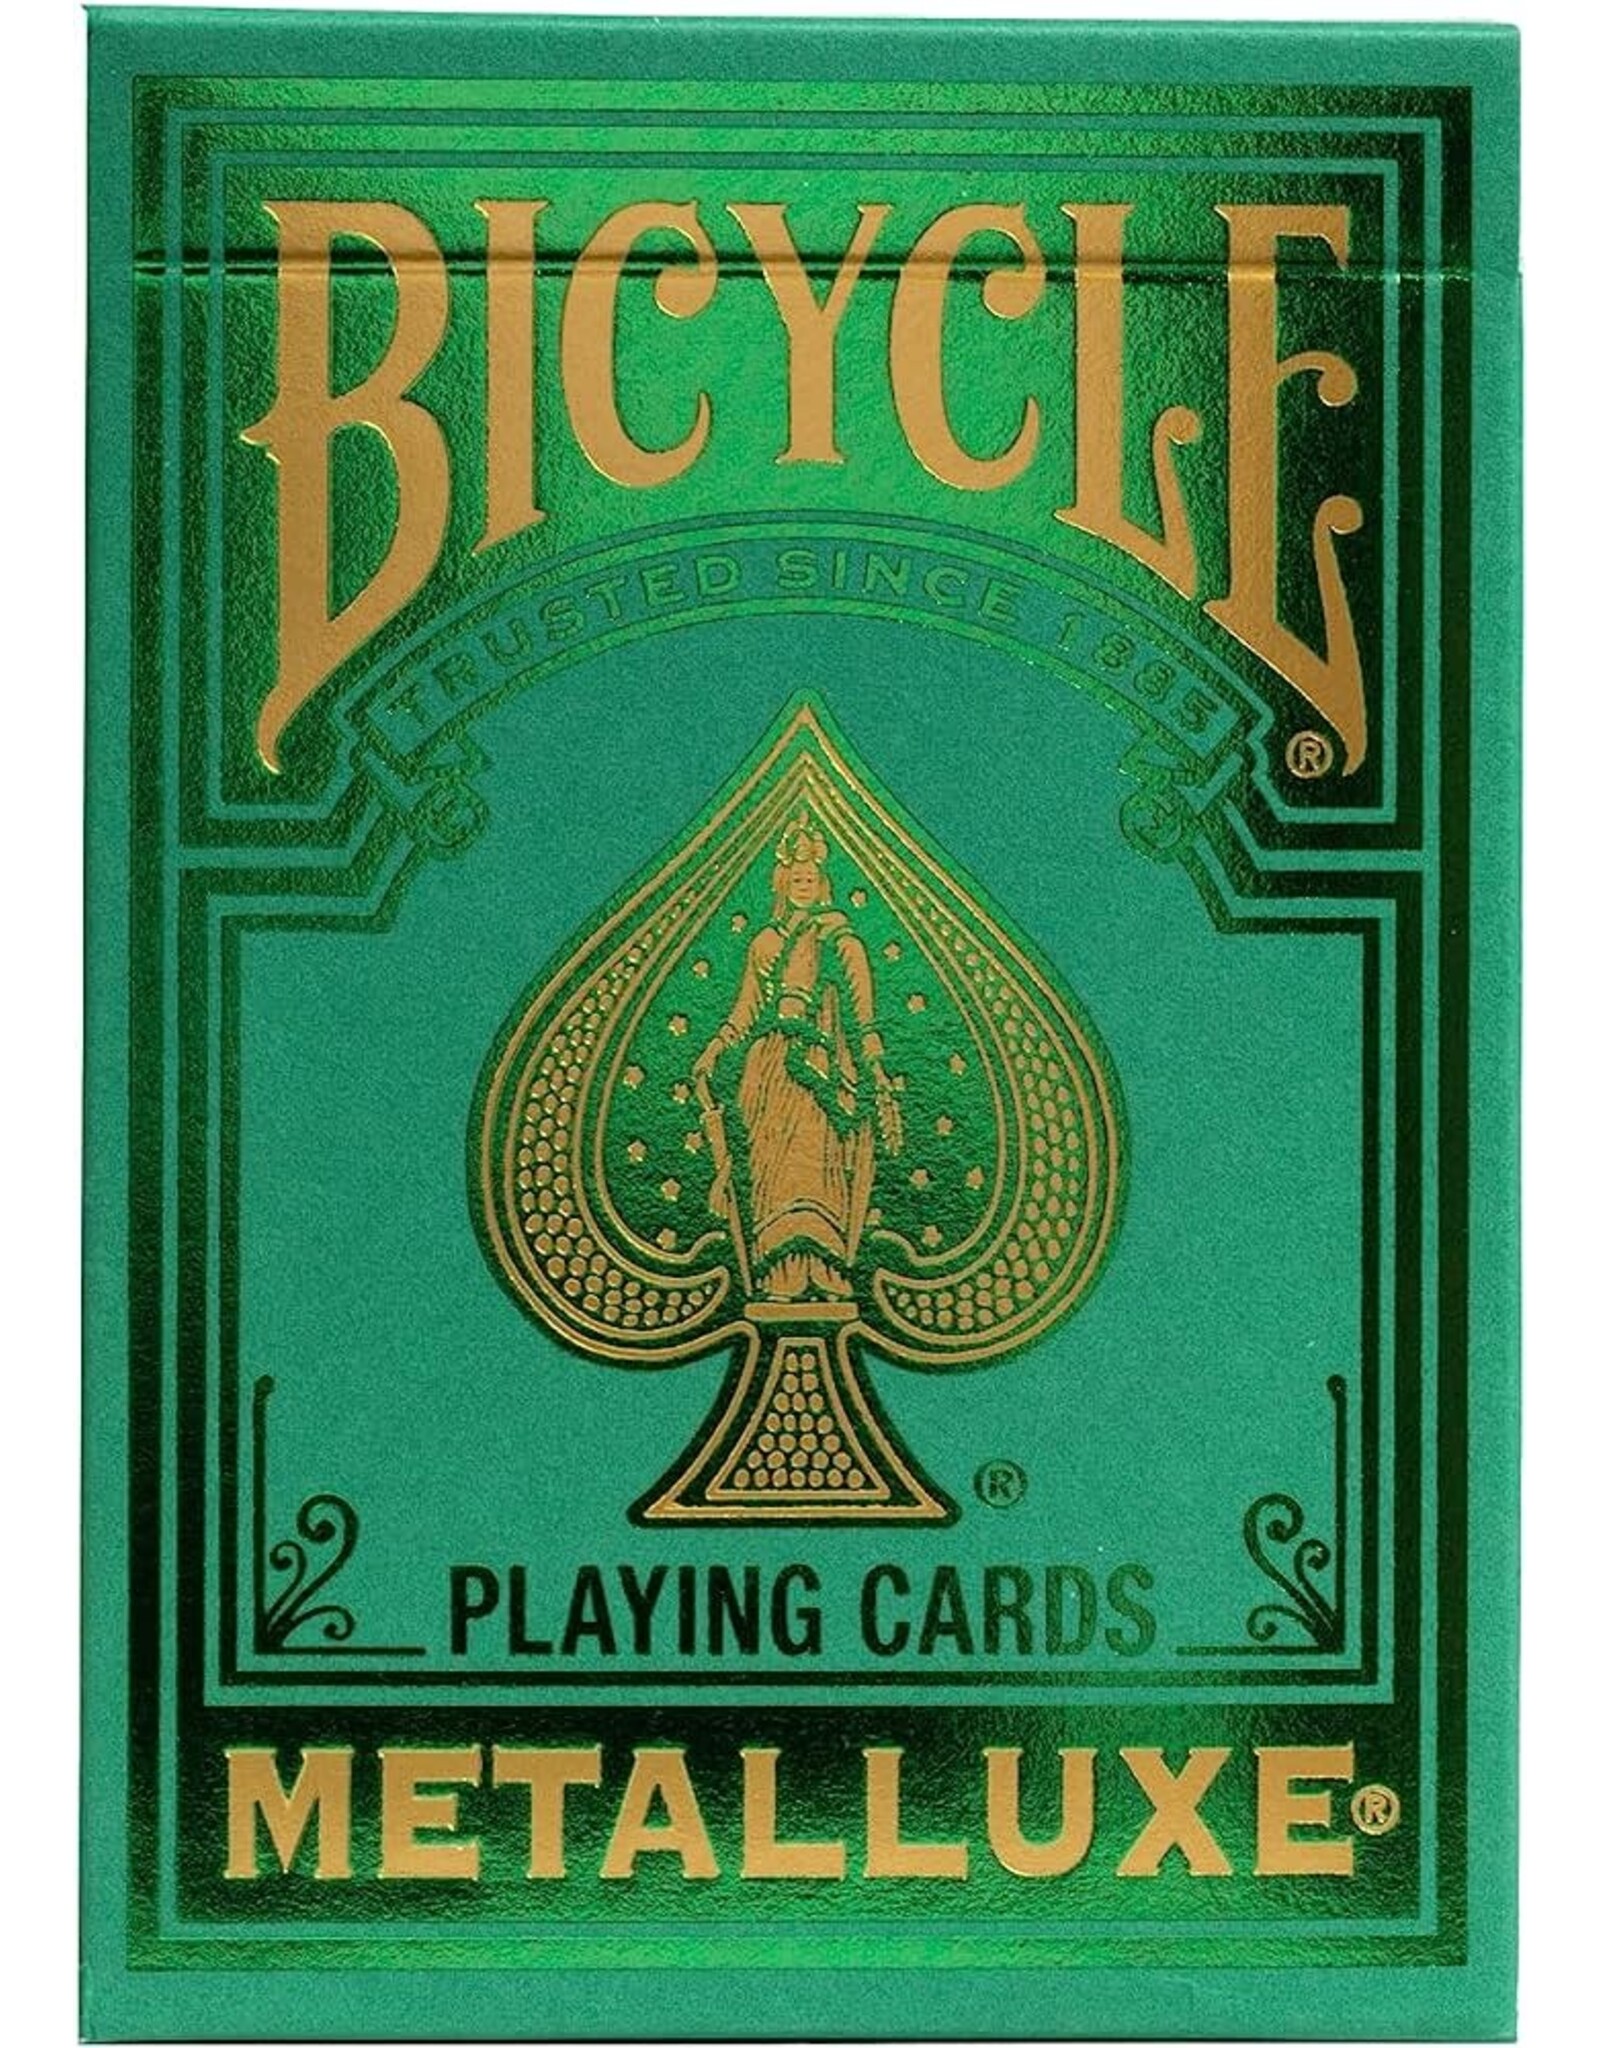 Bicycle Bicycle Deck: Metalluxe Holiday Green